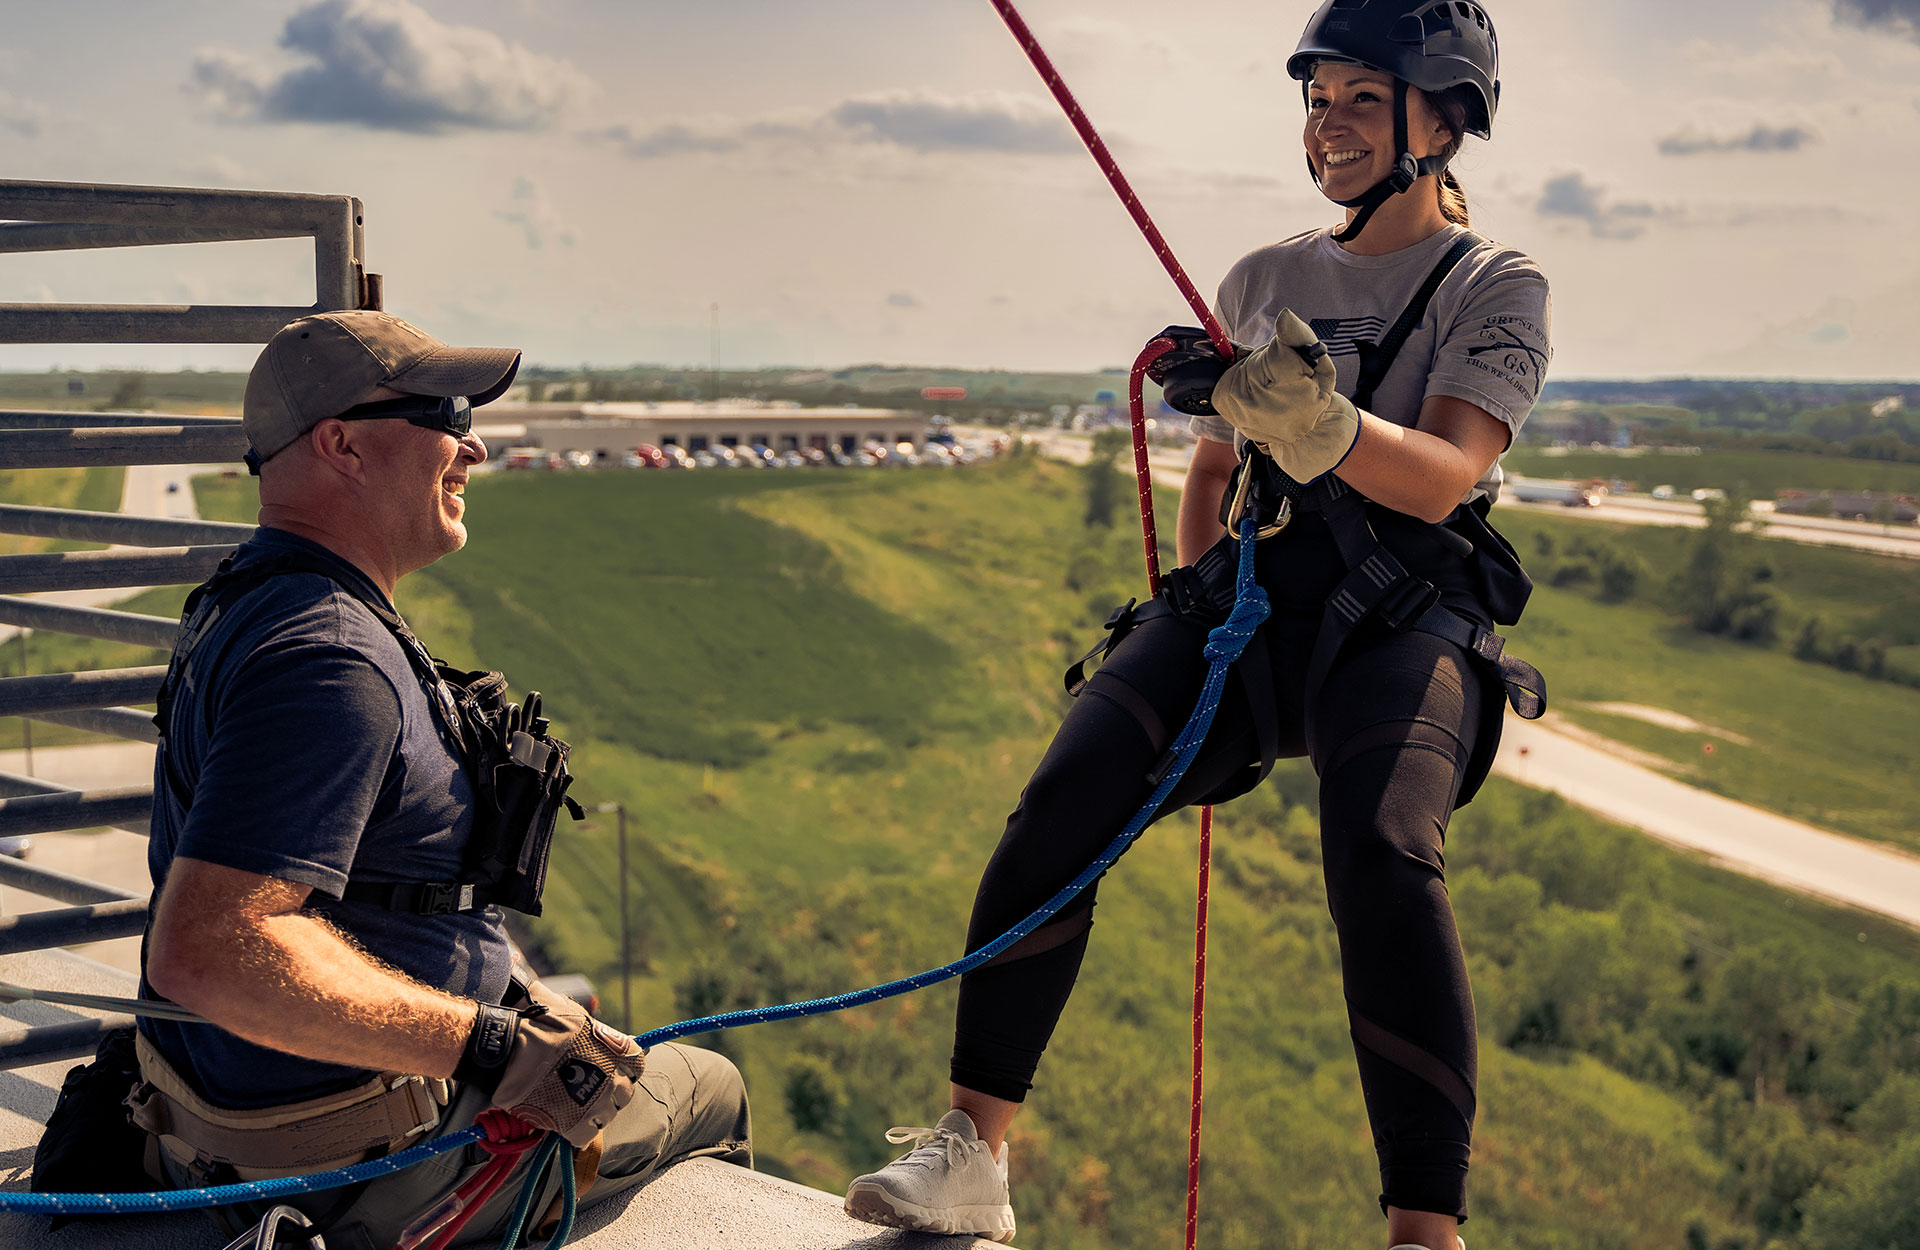 Rappelling Experience Event, 88 Tactical Omaha